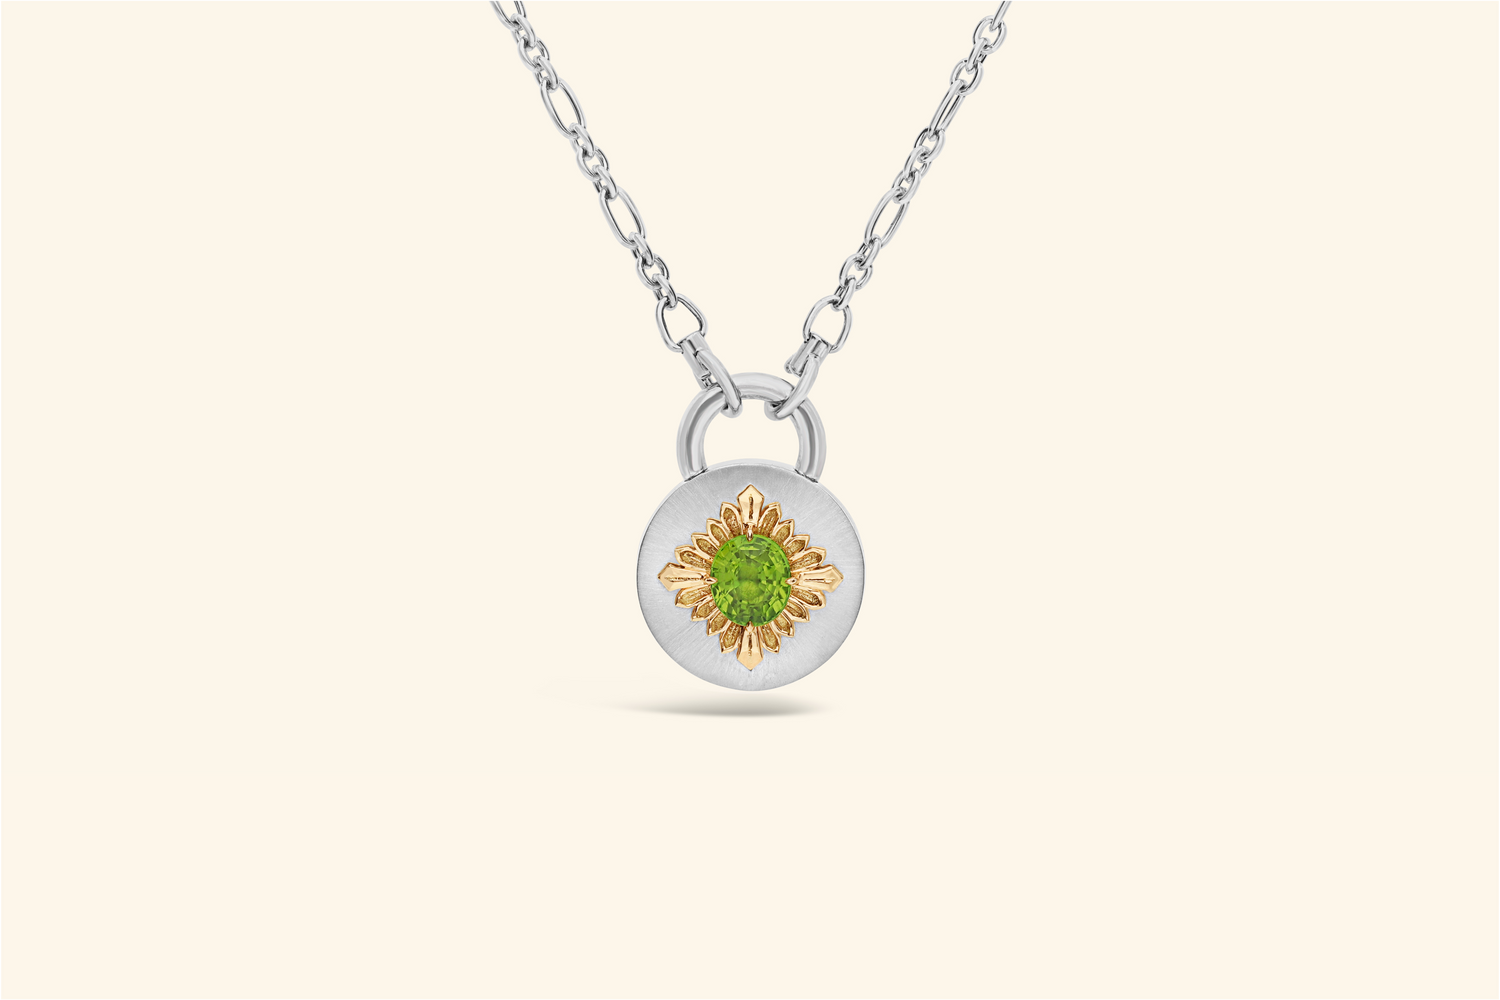 Tag necklace, silver, yellow gold, peridot